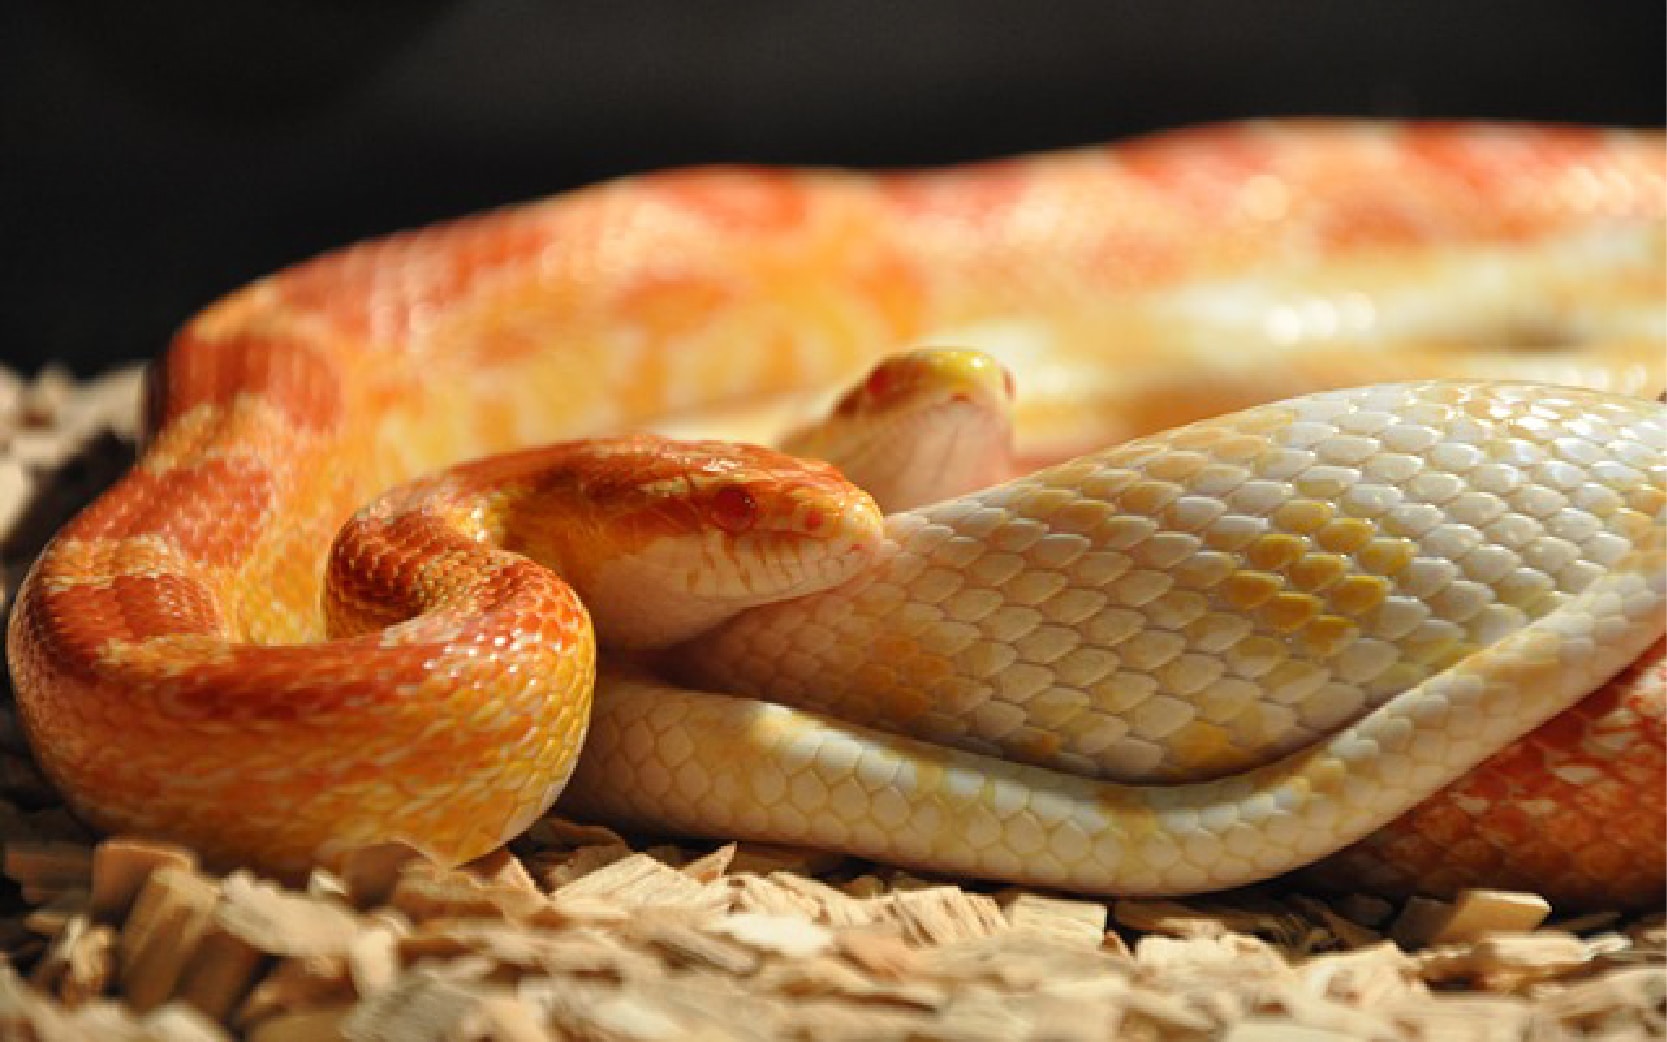 16 Popular Types Of Pet Snakes With Pictures Reptile Advisor,Orchid Flower Spike